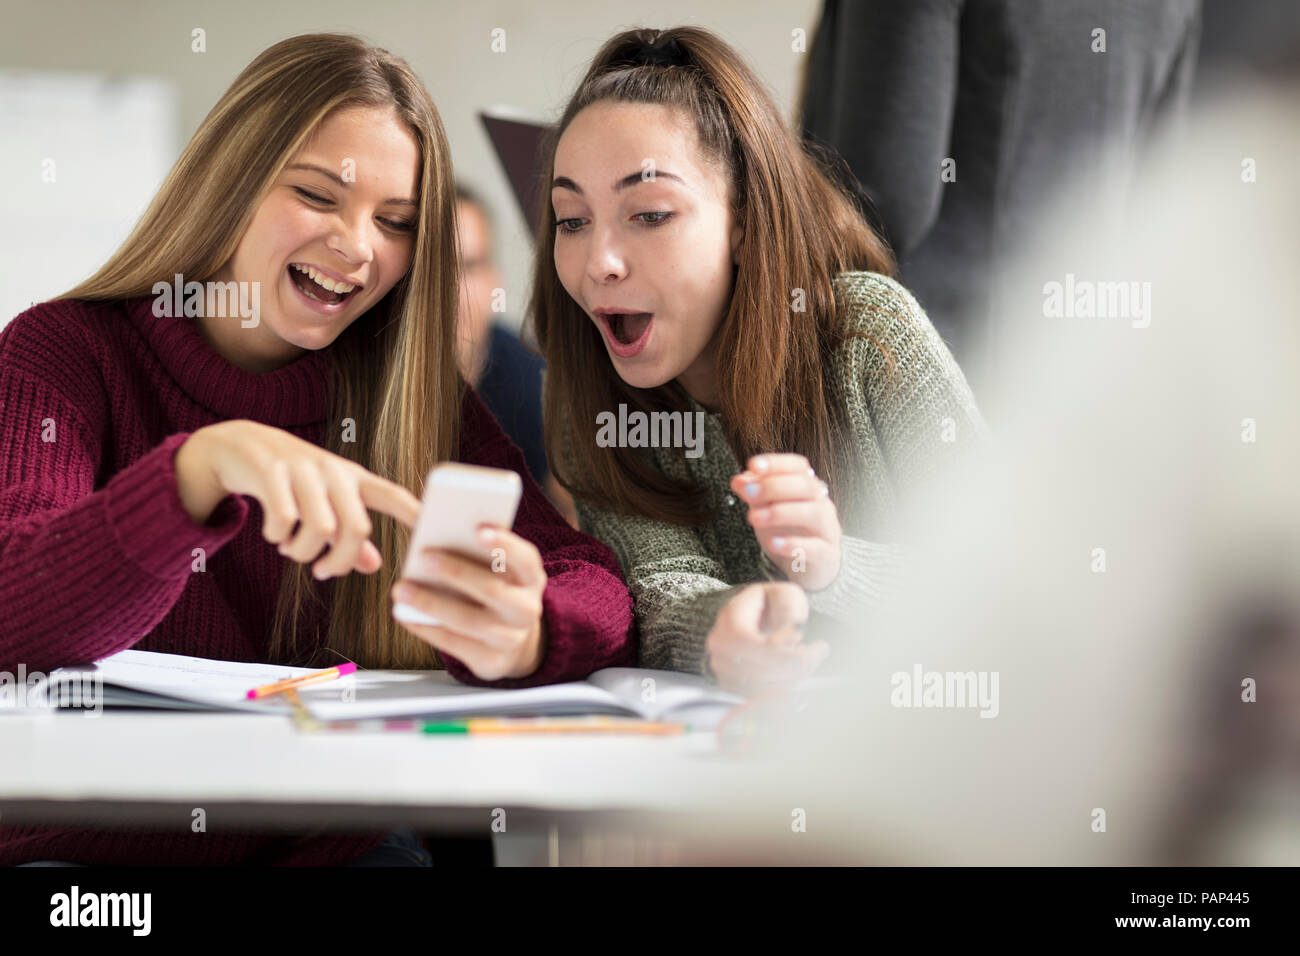 Happy teenage girls in class looking at cell phone Stock Photo